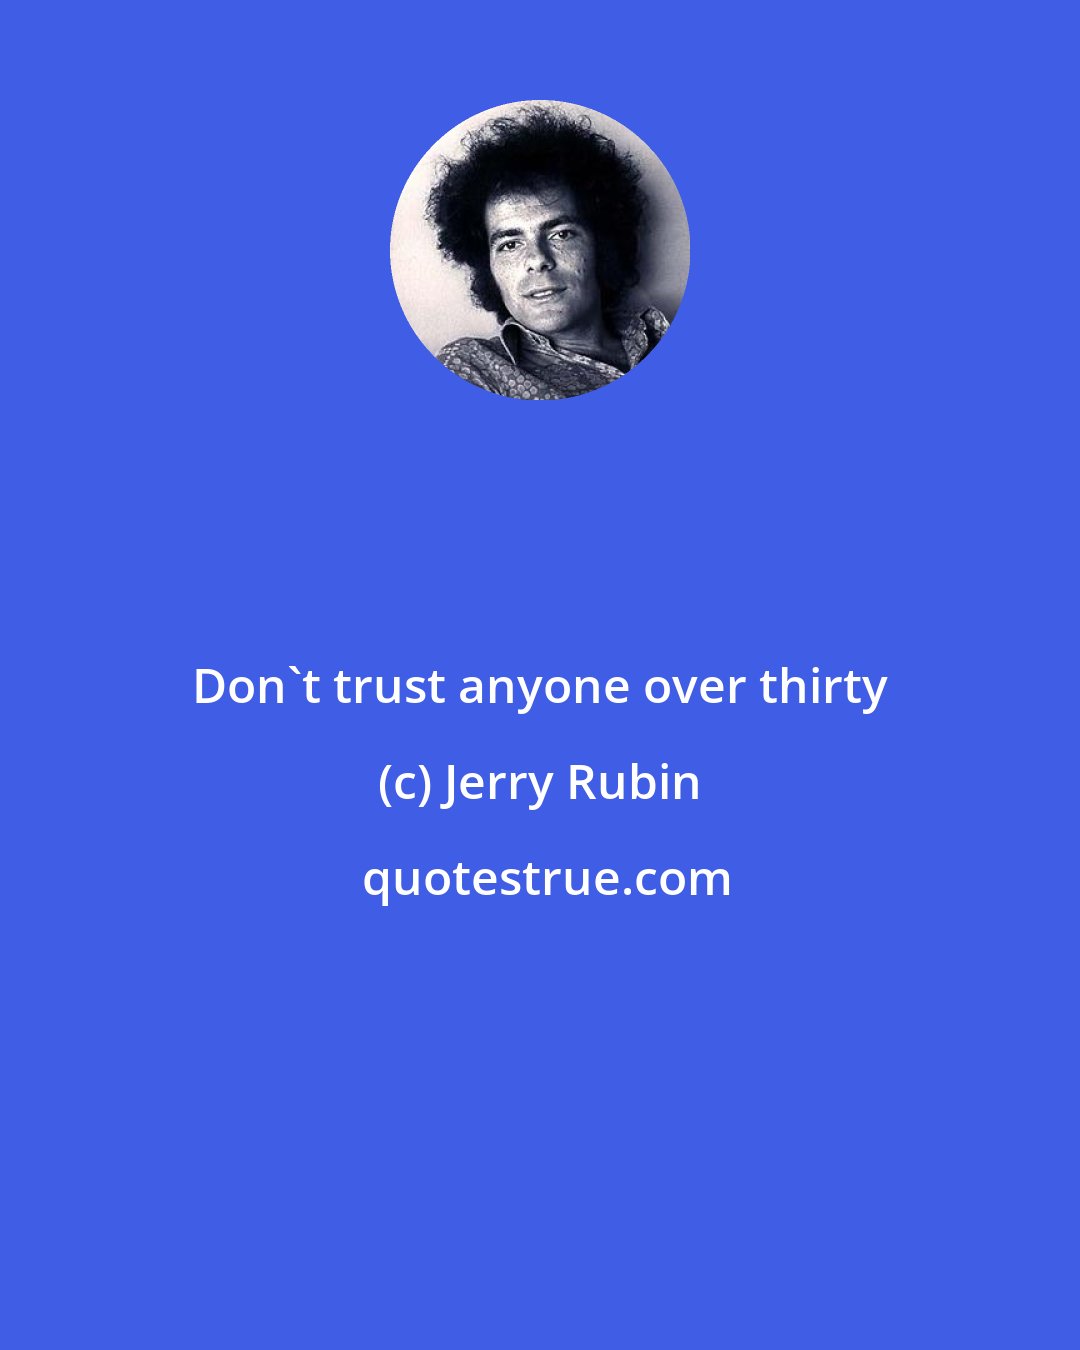 Jerry Rubin: Don't trust anyone over thirty